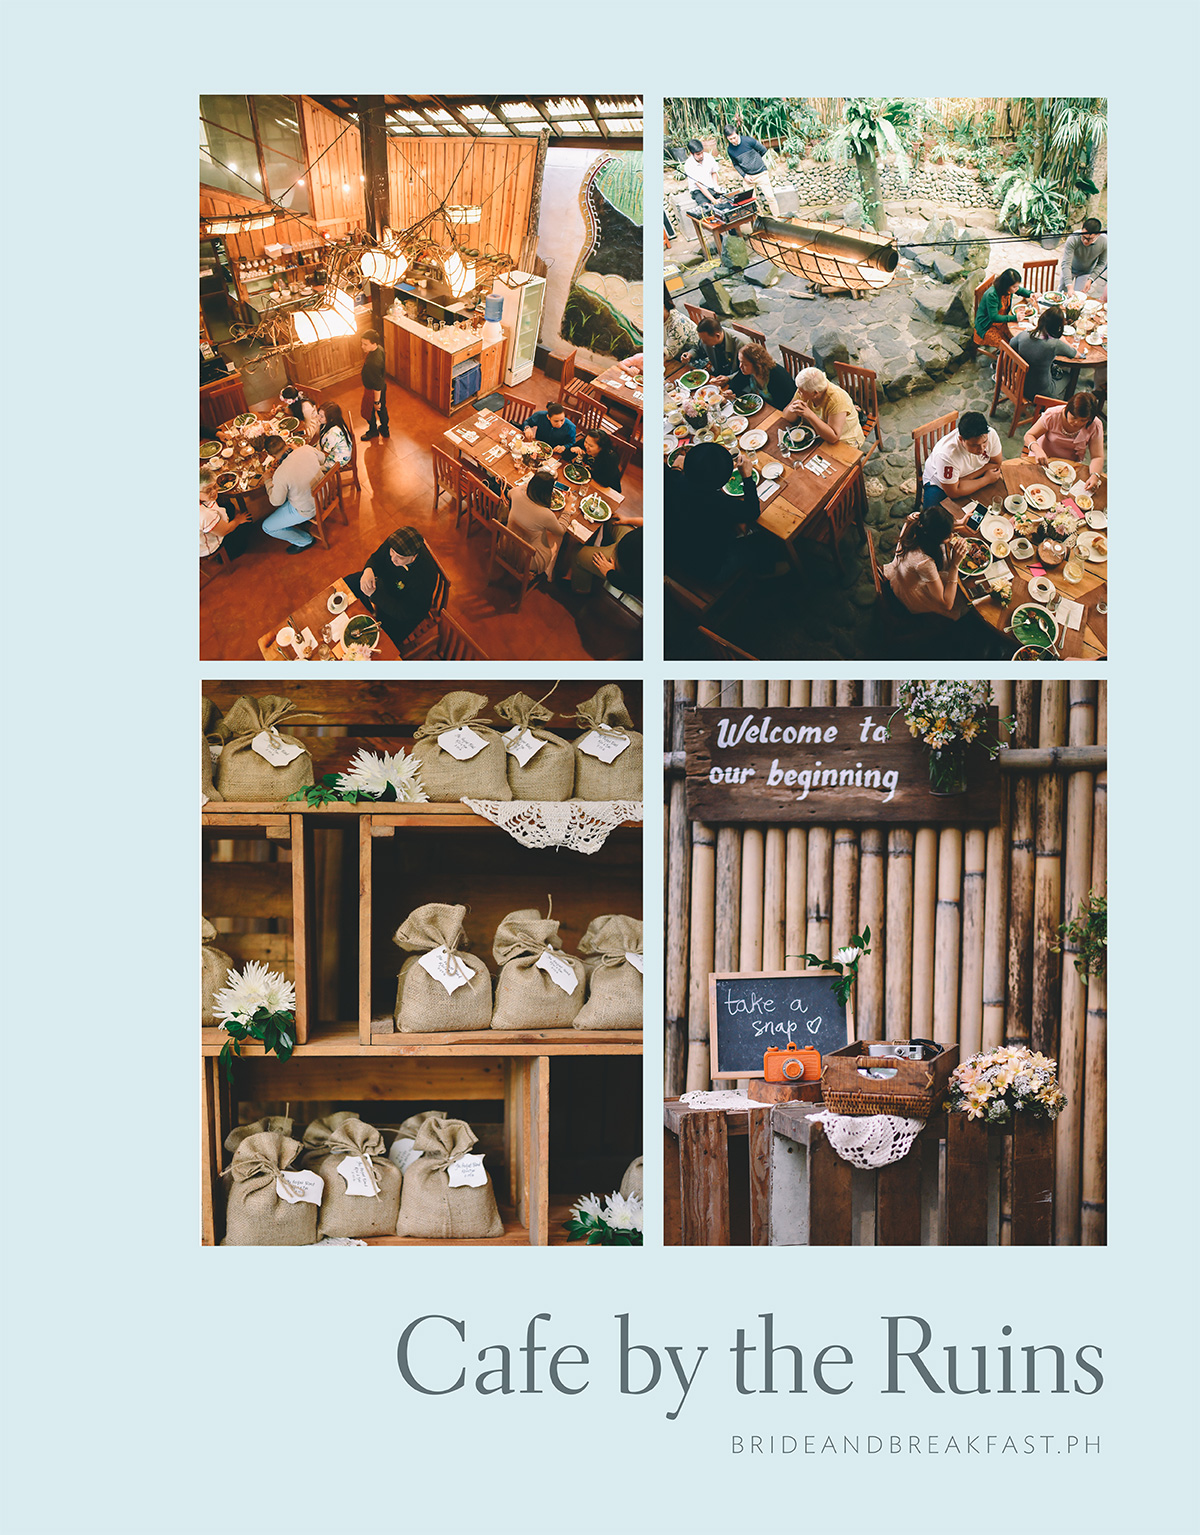 Cafe by the Ruins